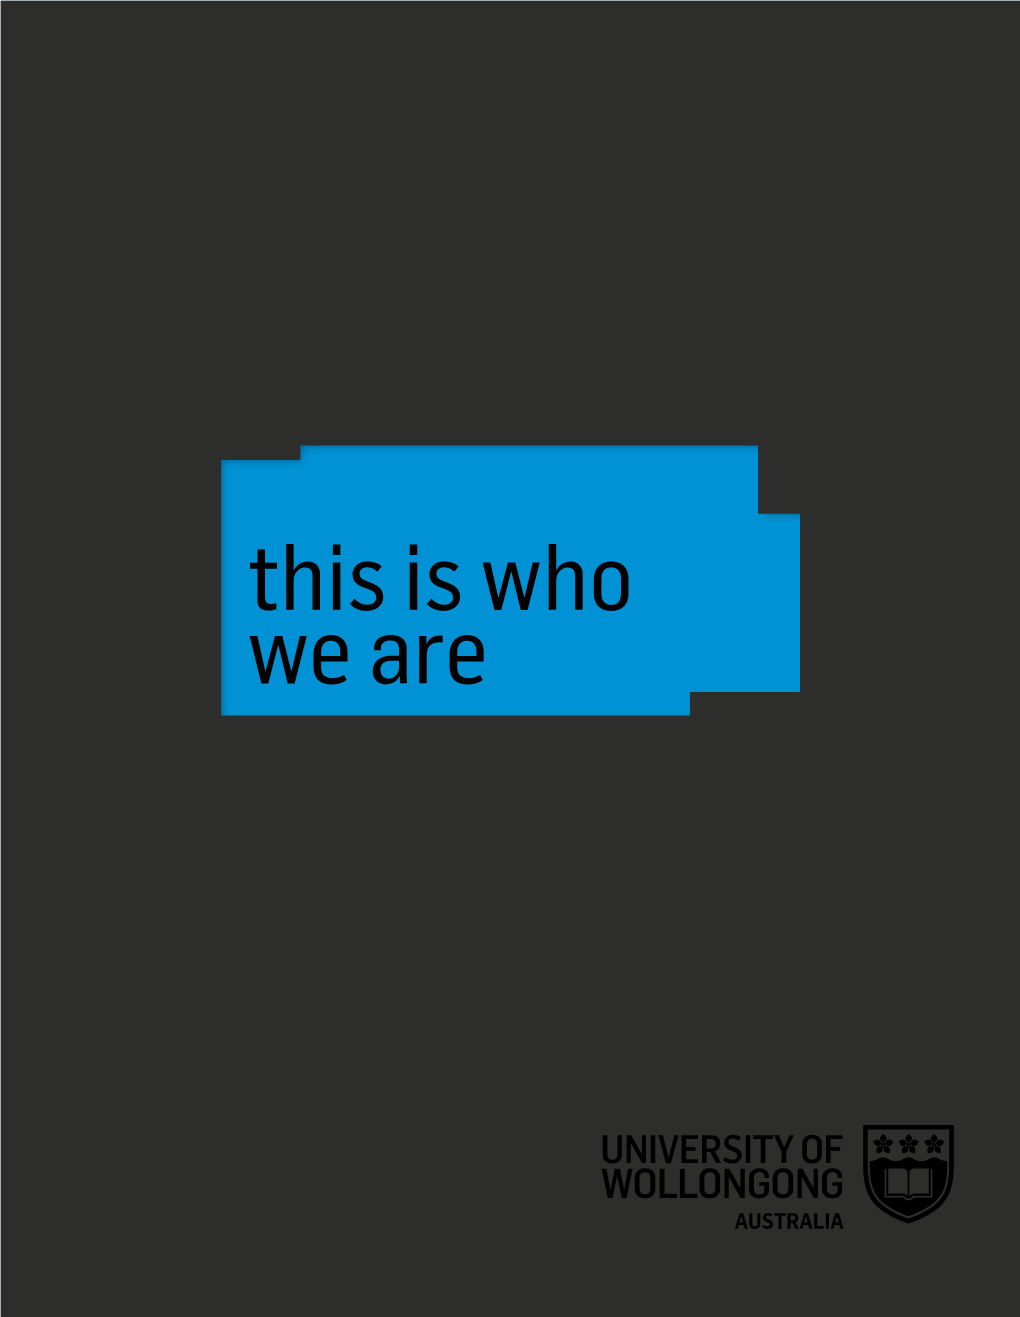 This Is Who We Are This Is Who We Are at UOW, We Believe in the Power of Connecting People, Ideas and Places to Change Things for the Better